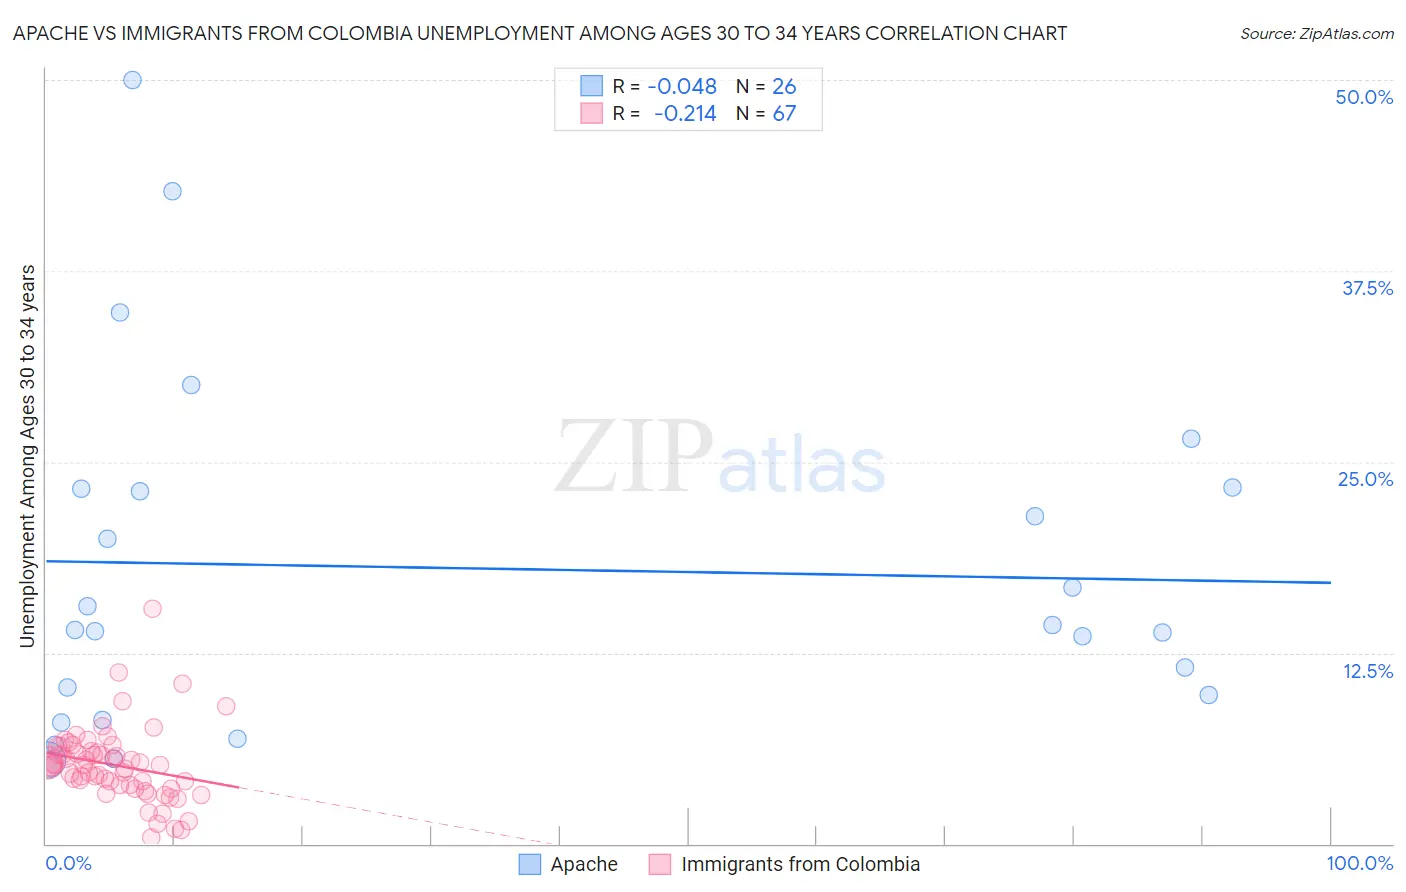 Apache vs Immigrants from Colombia Unemployment Among Ages 30 to 34 years